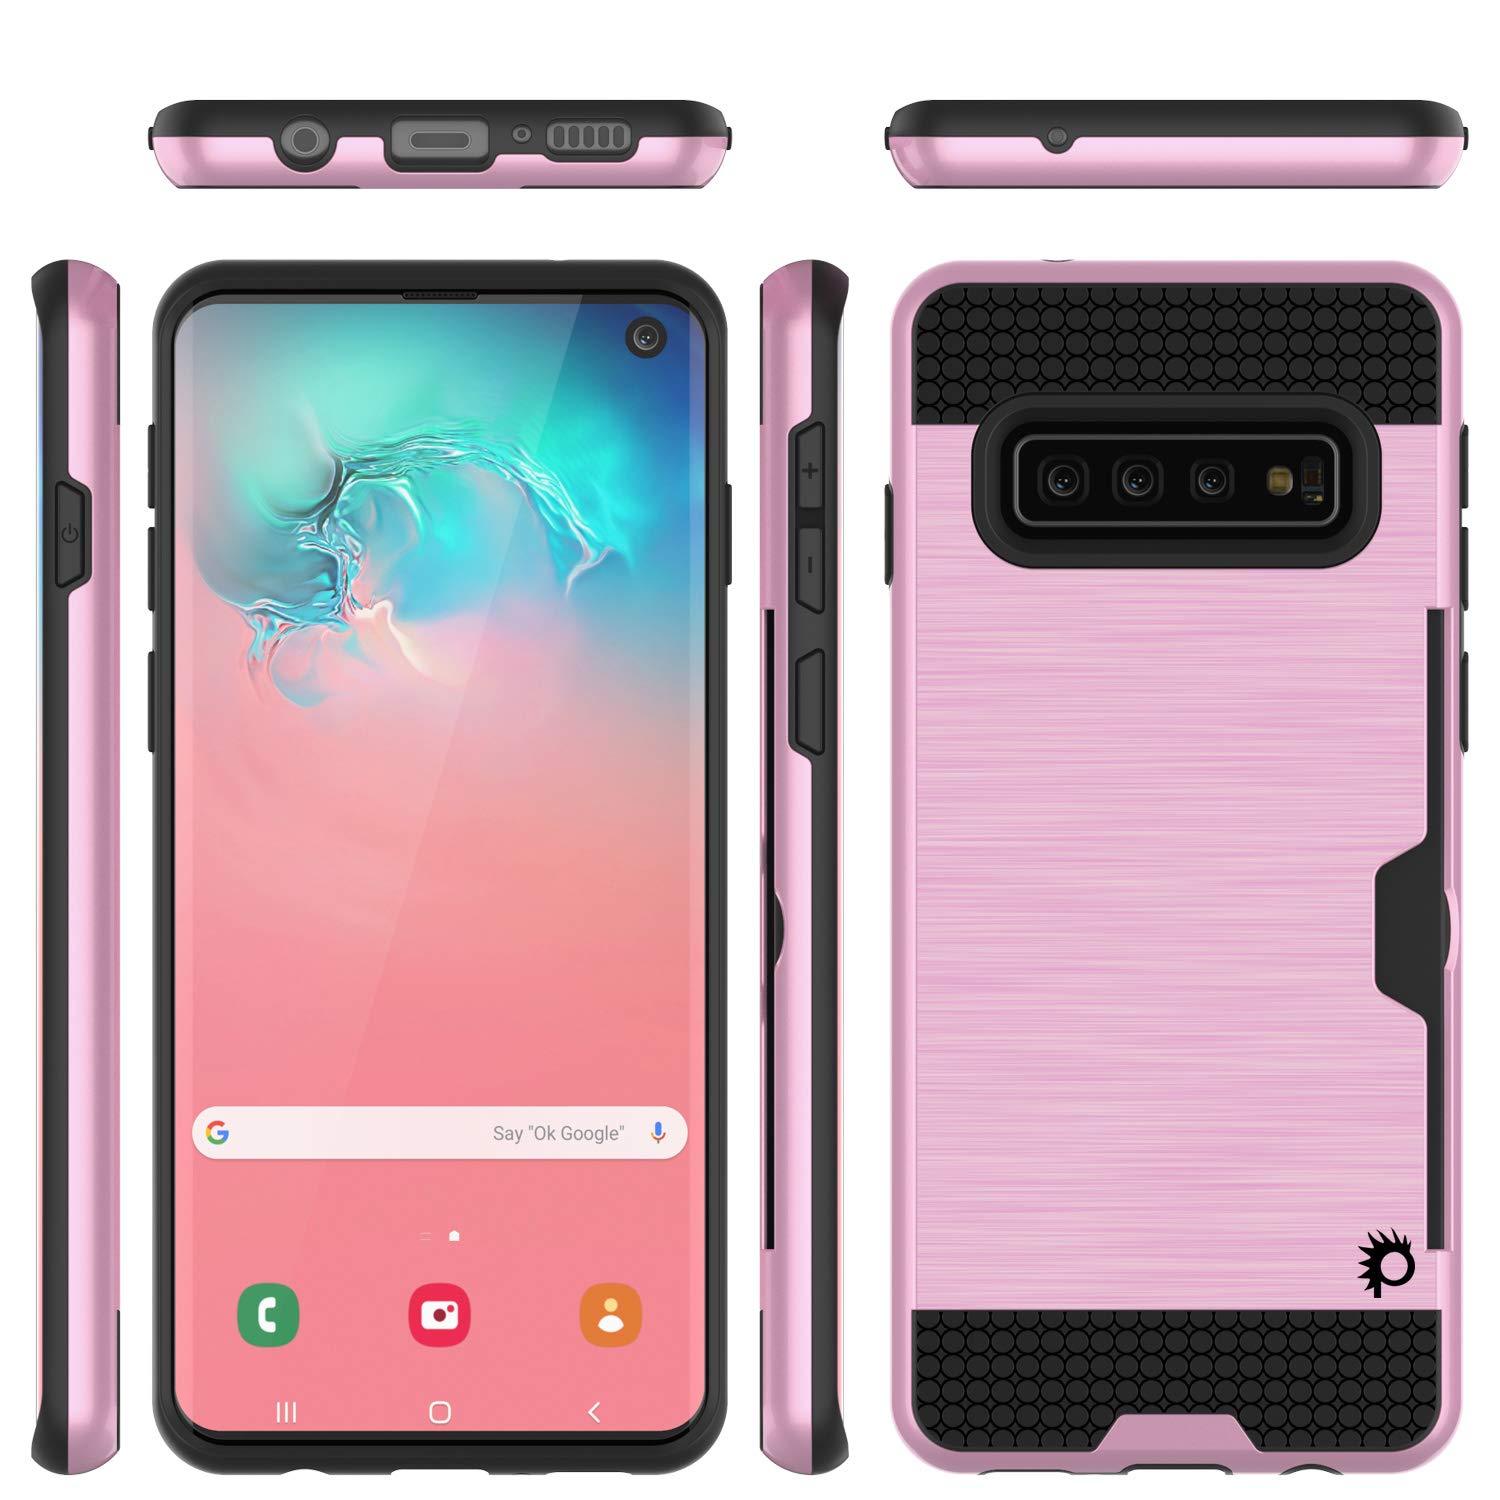 Galaxy S10e Case, PUNKcase [SLOT Series] [Slim Fit] Dual-Layer Armor Cover w/Integrated Anti-Shock System, Credit Card Slot [Pink]